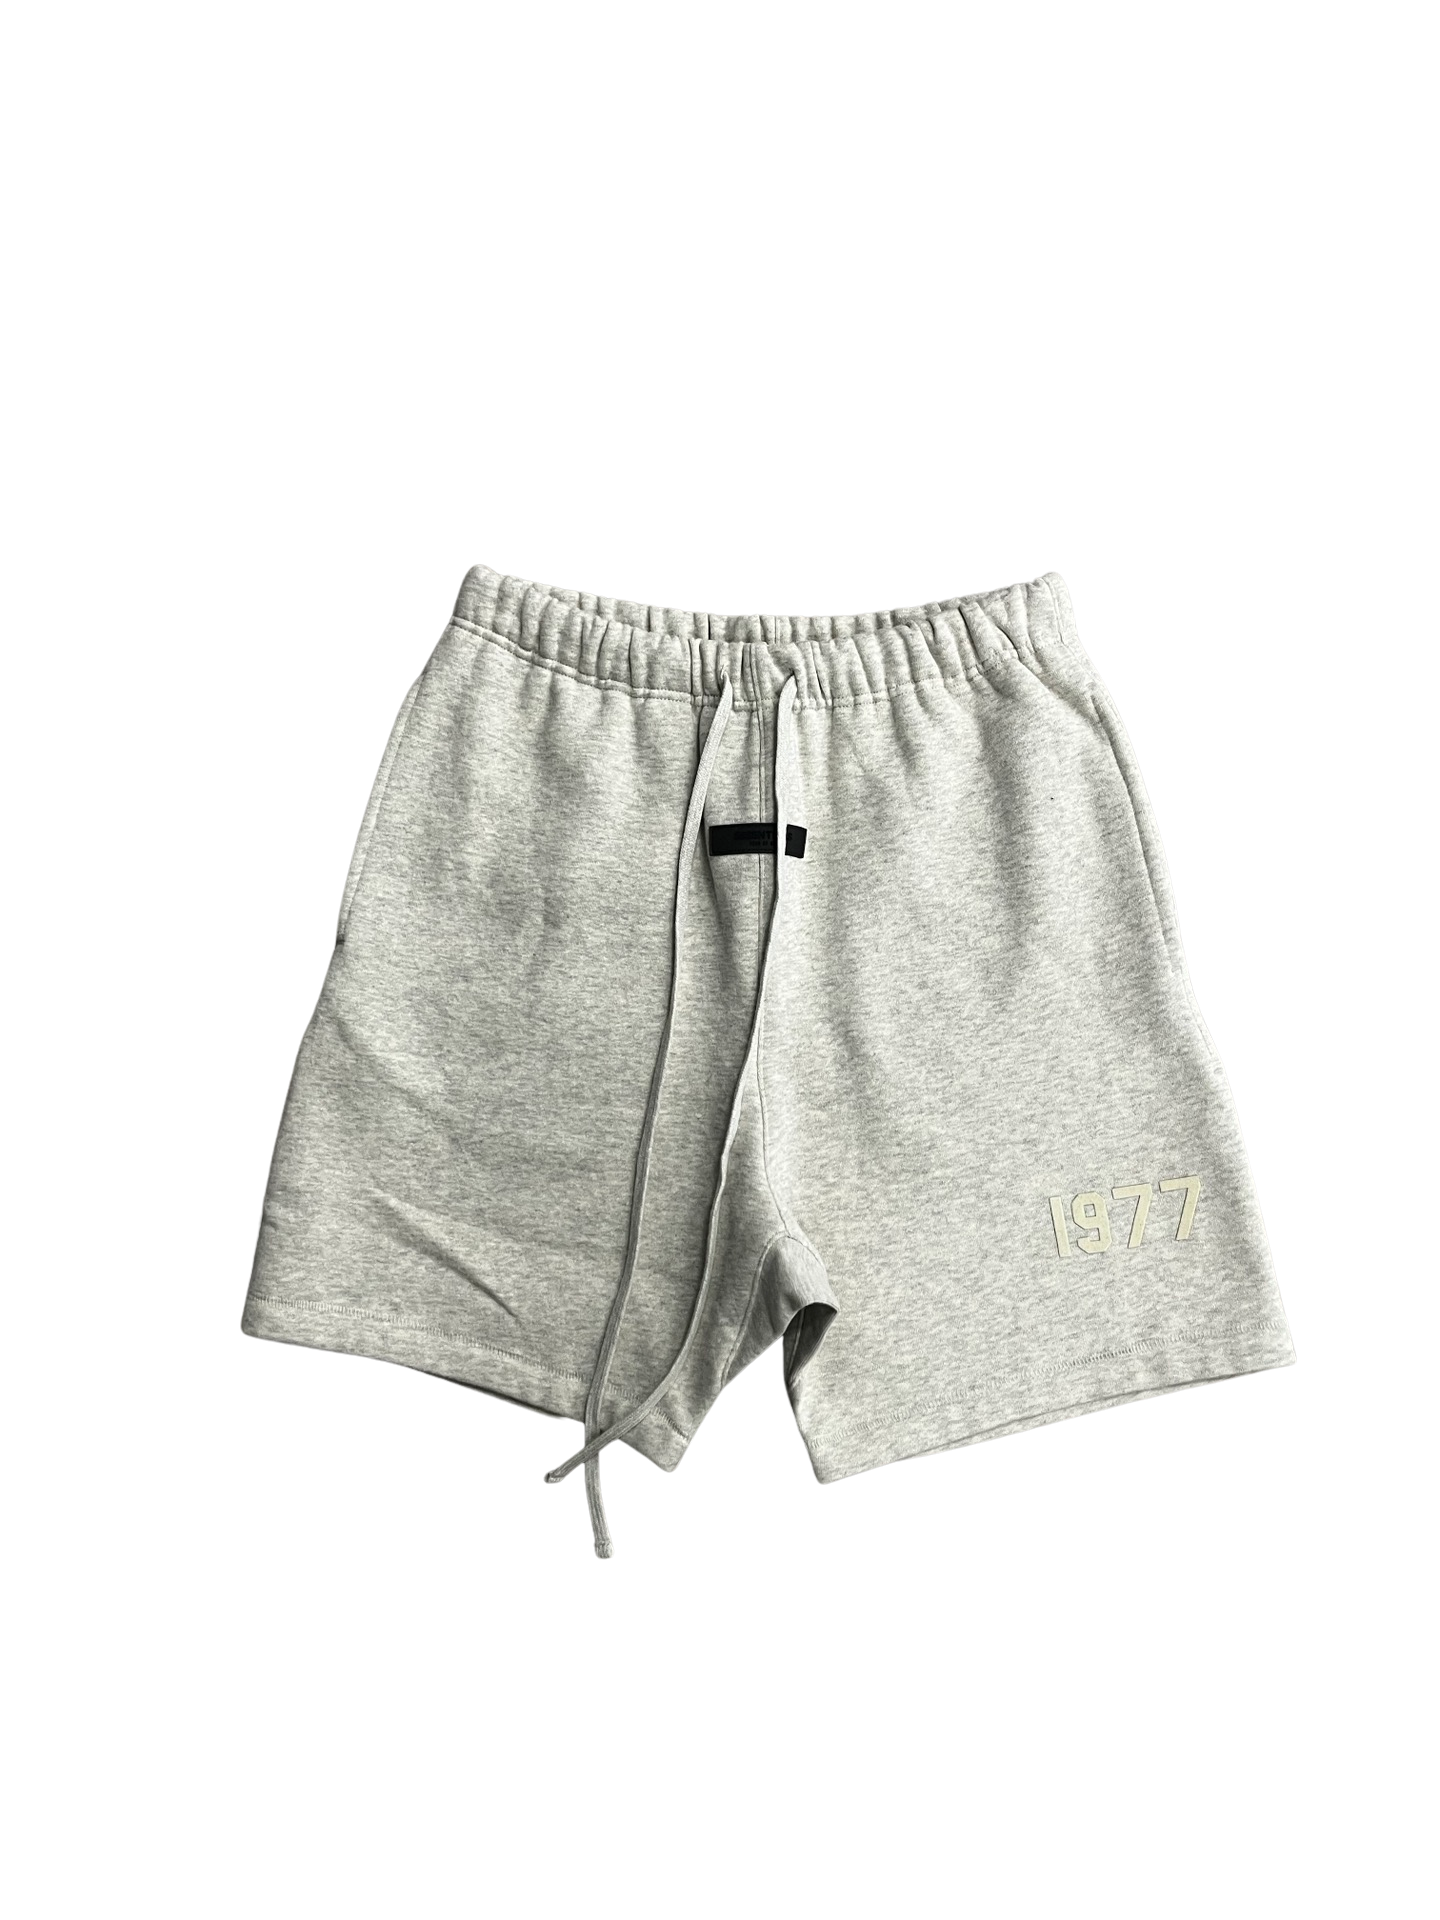 Essentials Shorts “oatmeal” – SNKRVILLE